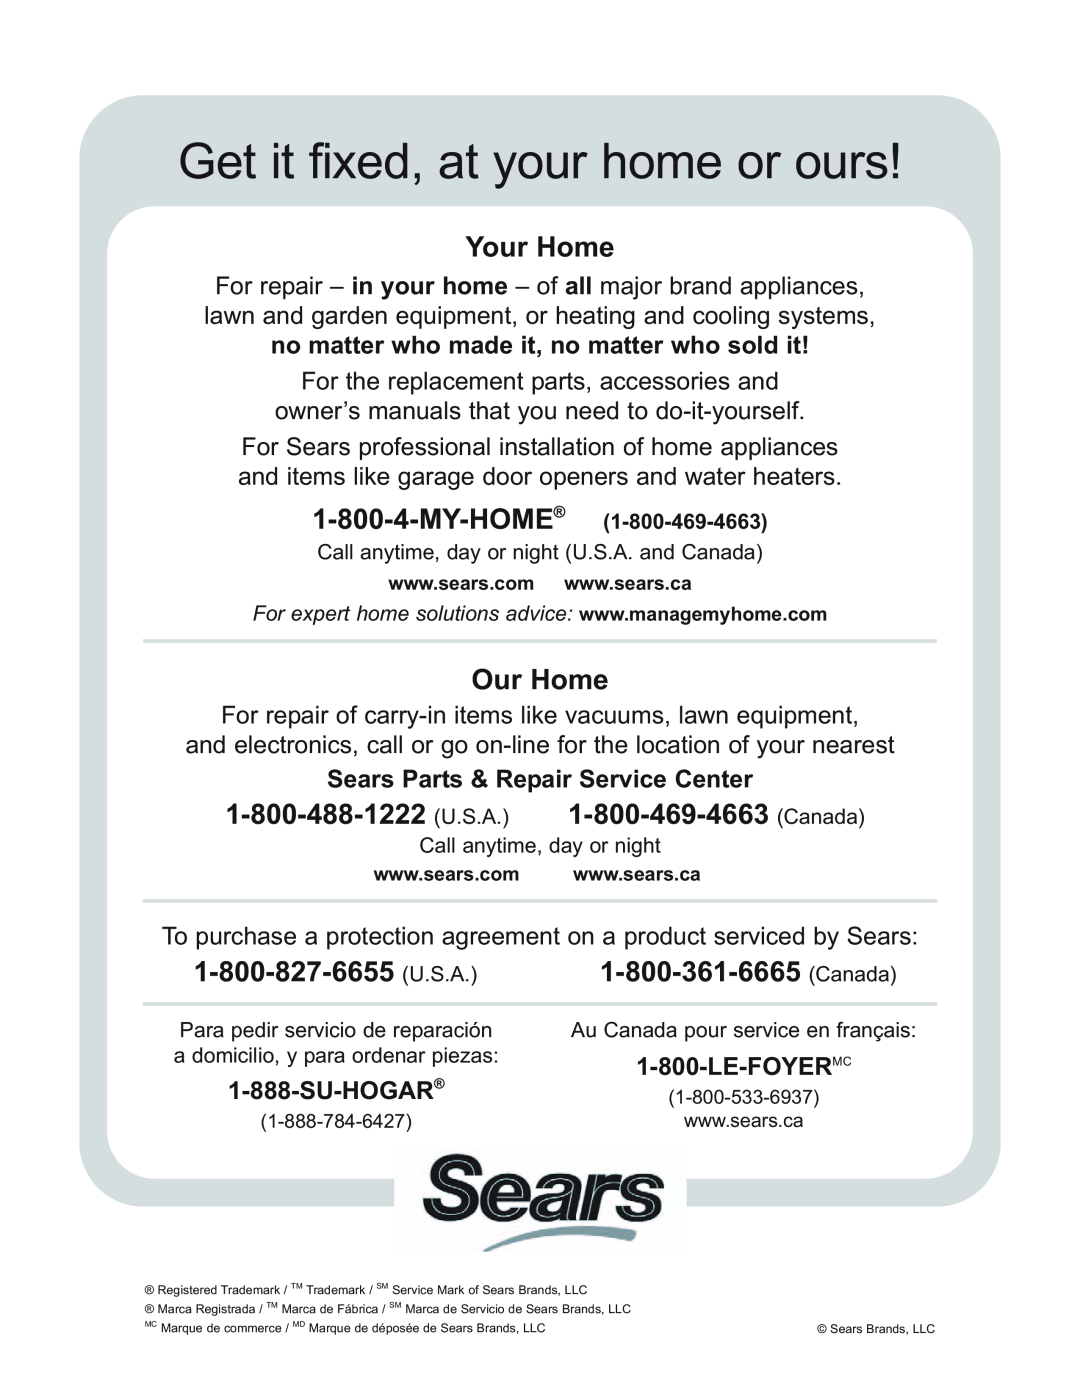 Kenmore 625.38445 Sears Parts & Repair Service Center, Su-Hogar, Le-Foyermc, Get it fixed, at your home or ours, Your Home 